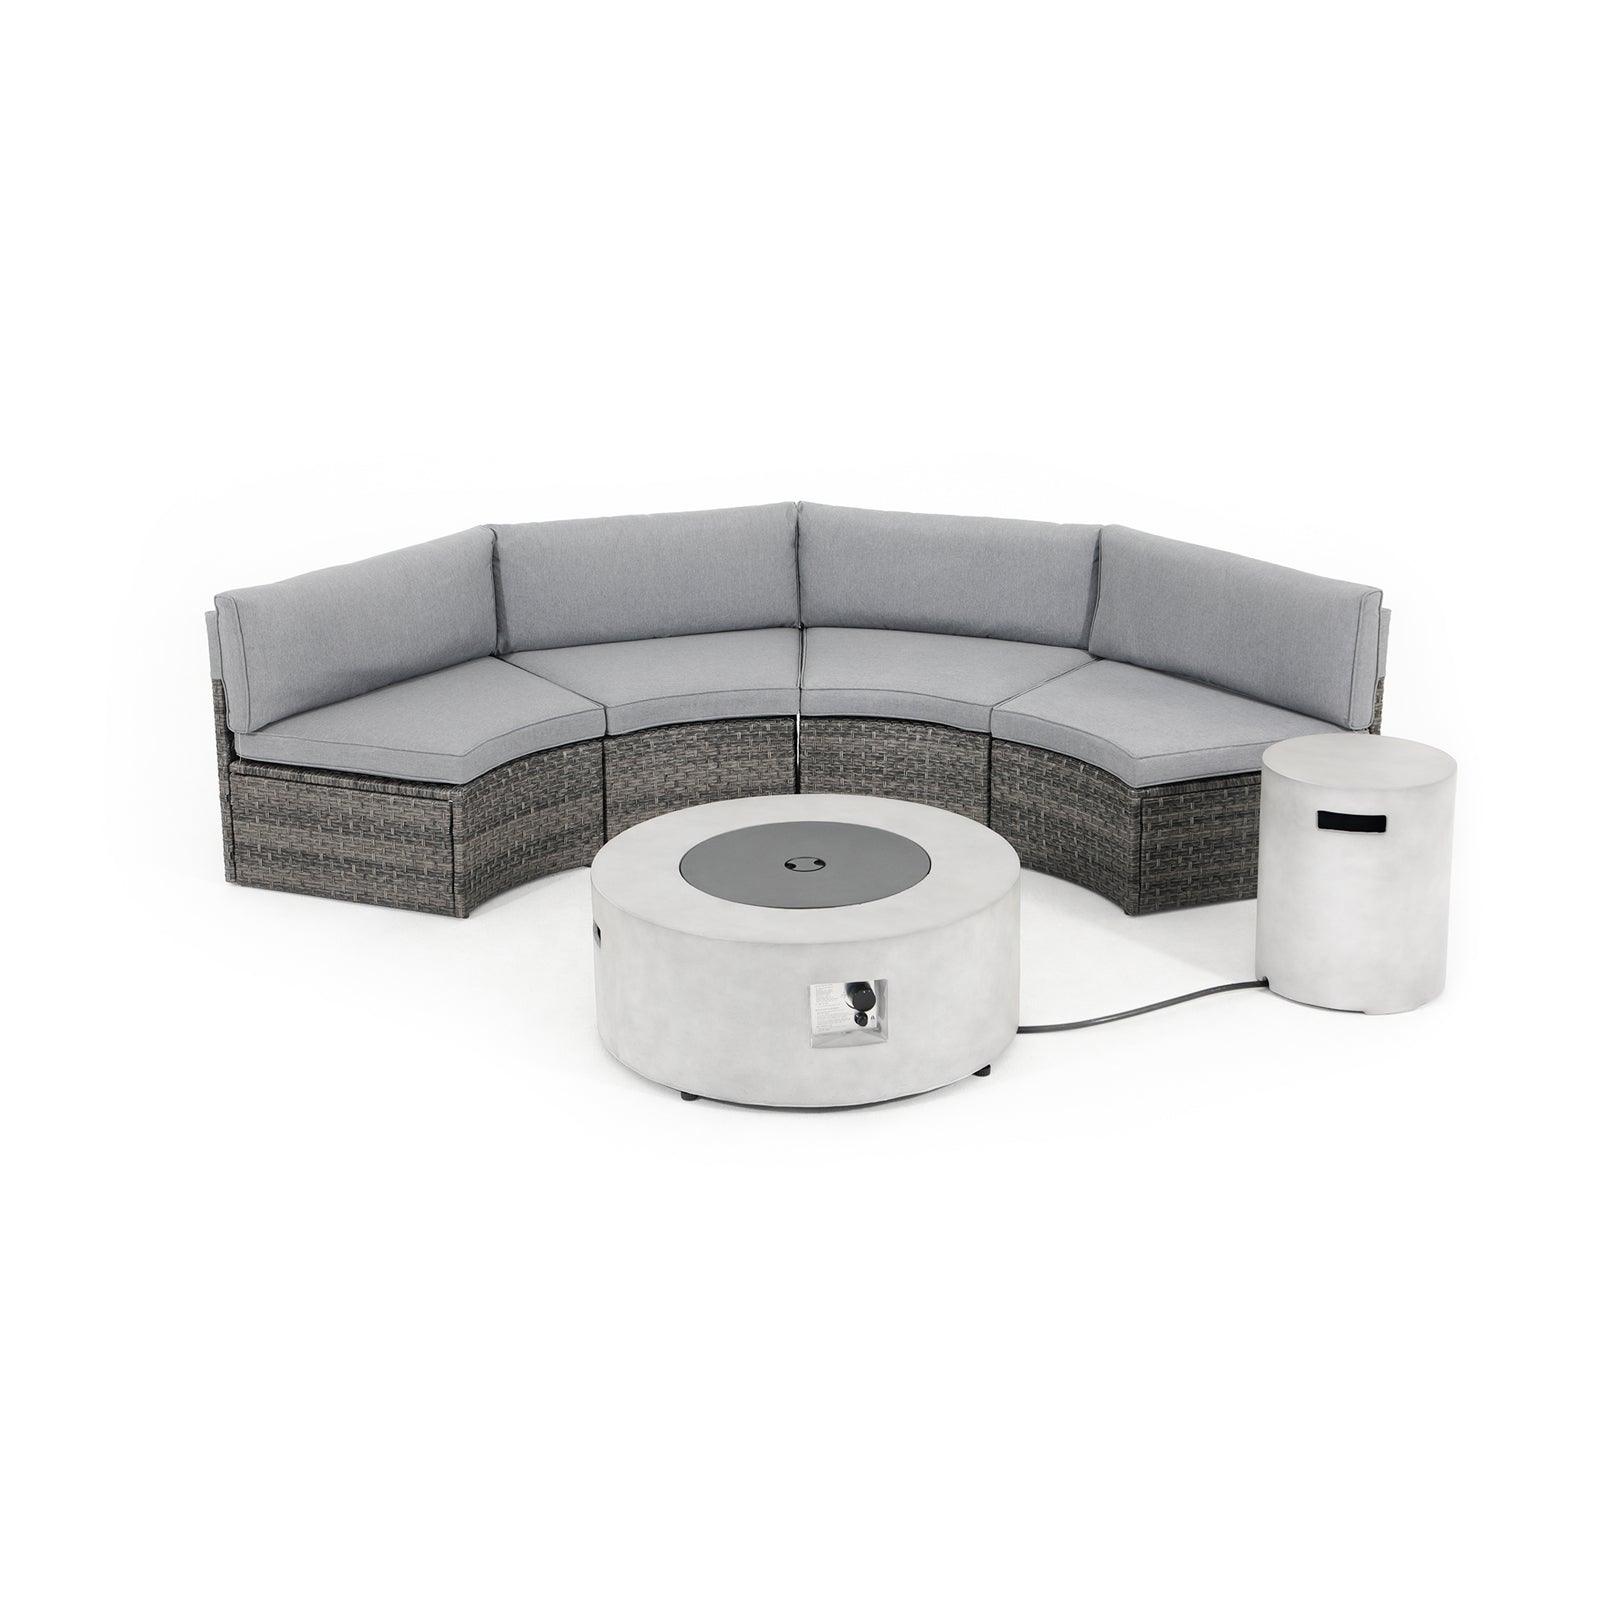 Boboli 4 seat Grey Wicker Curved Sectionals with grey cushions, and 1 grey Propane Fire Pit with tank holder - Jardina Furniture #color_Grey #piece_5-pc.